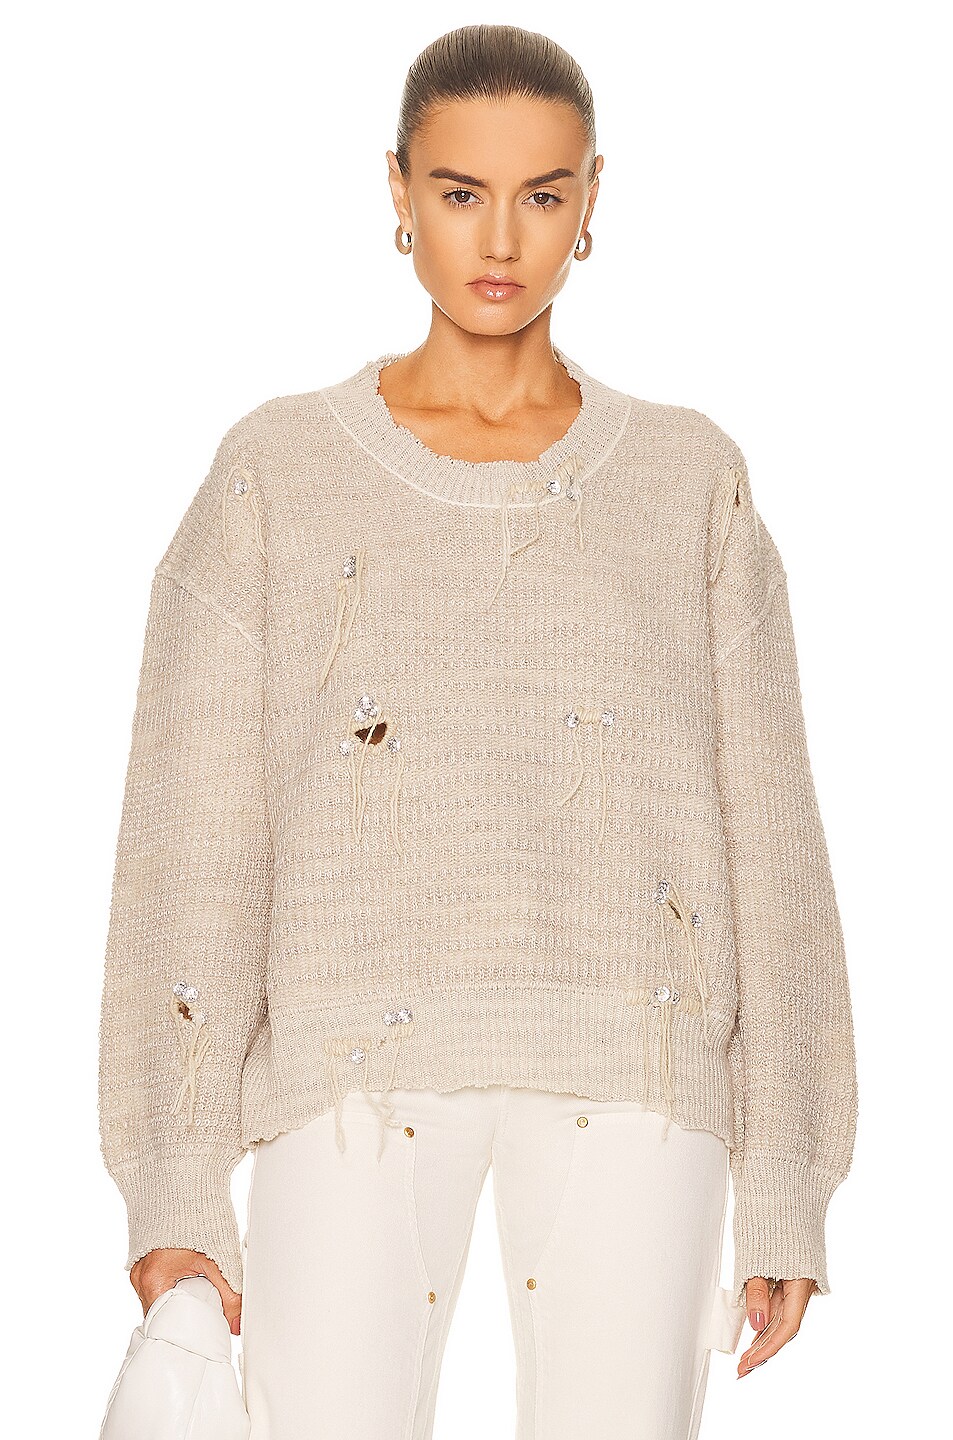 Acne Studios Cropped Sweater in Pale Grey & White | FWRD